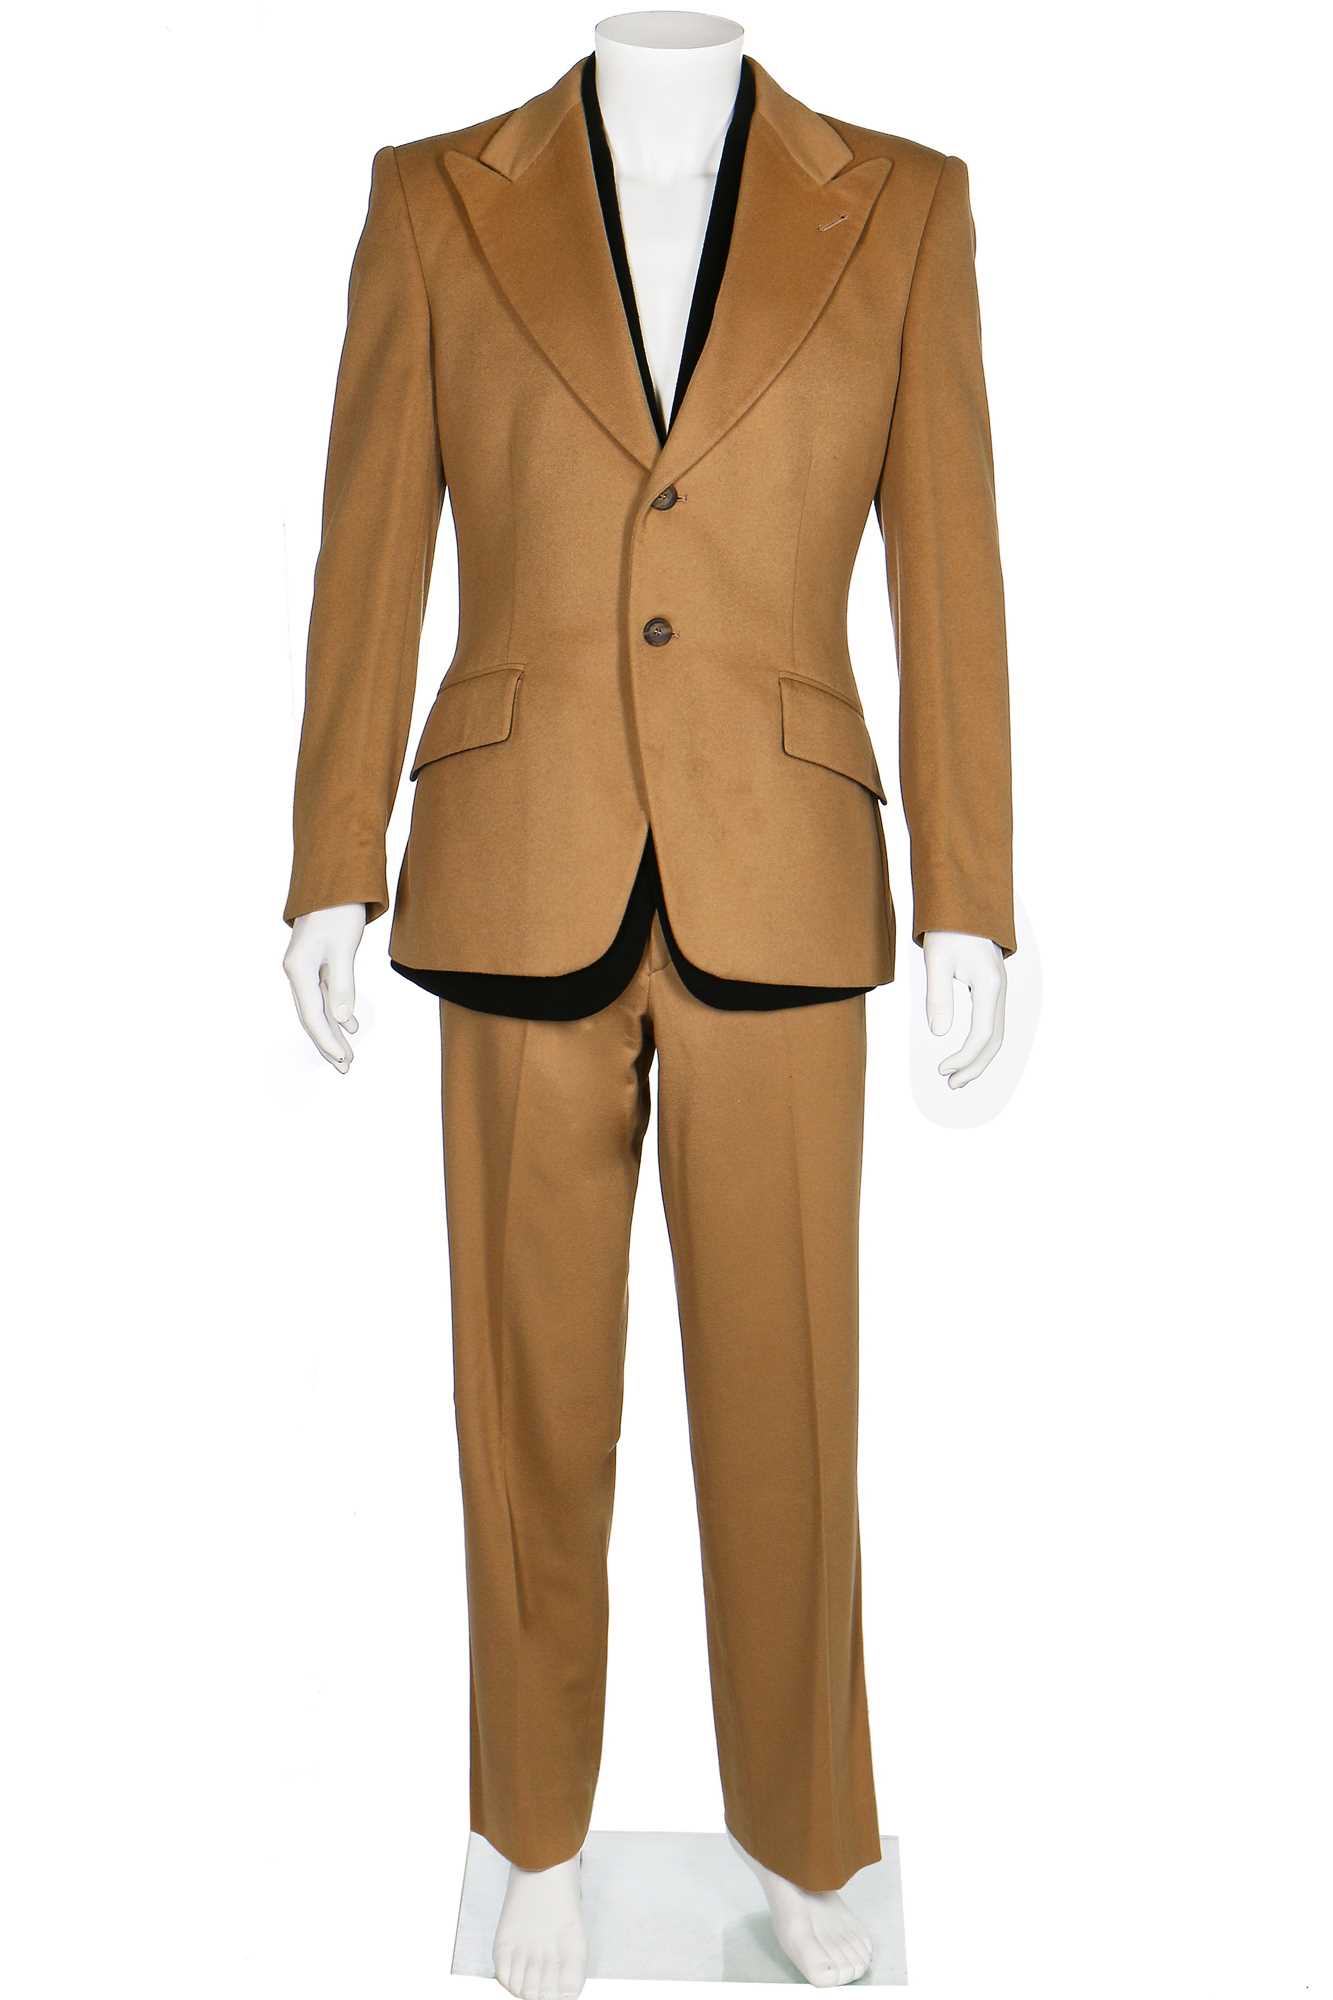 Lot 259 - An early Alexander McQueen man's layered cashmere suit, 'Dante' collection, Autumn-Winter 1996-97